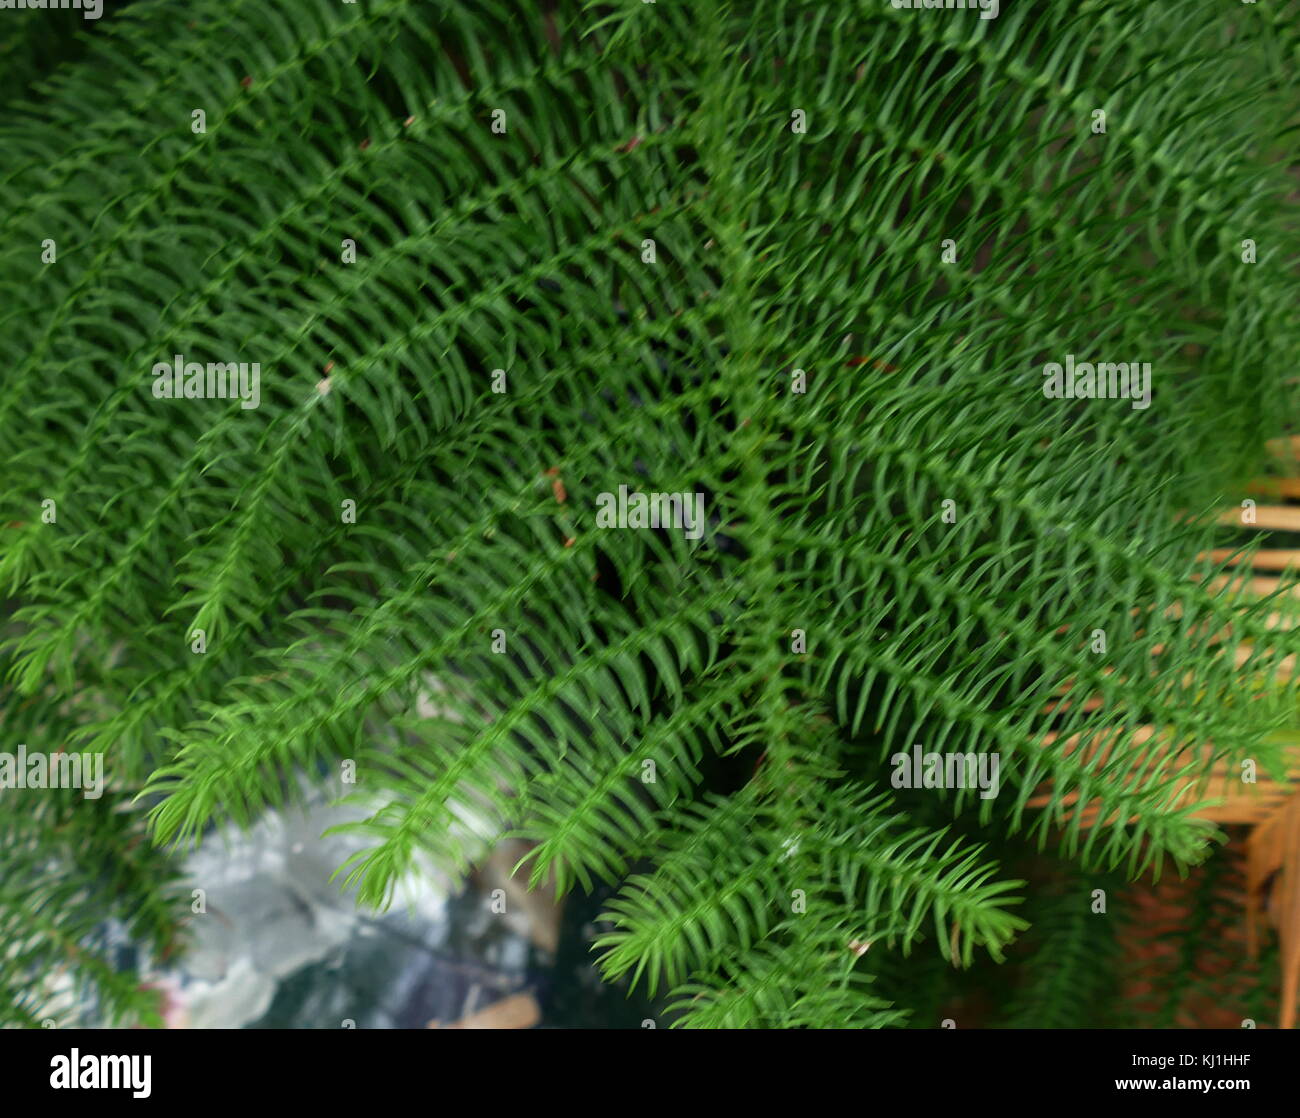 The Pinophyta, also known as Coniferophyta or Coniferae, or commonly as conifers, are a division of vascular land plants containing a single class, Pinopsida. They are gymnosperms, cone-bearing seed plants. All extant conifers are perennial woody plants with secondary growth. The great majority are trees, though a few are shrubs. Stock Photo